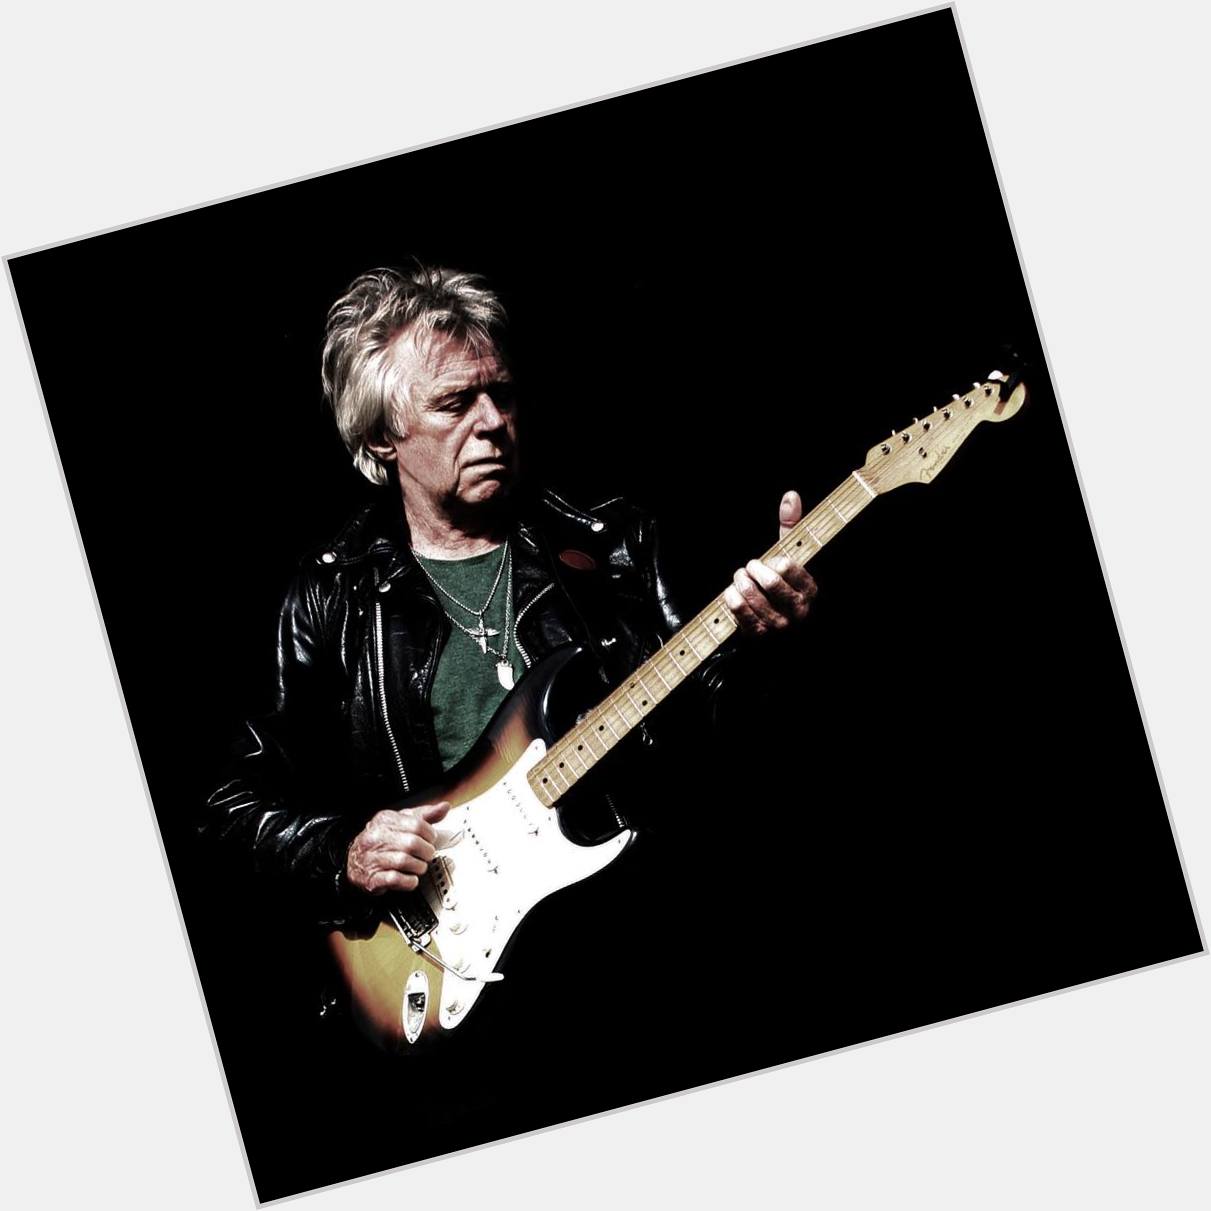 Happy 78 birthday to the amazing guitarist and singer Dave Edmunds! 